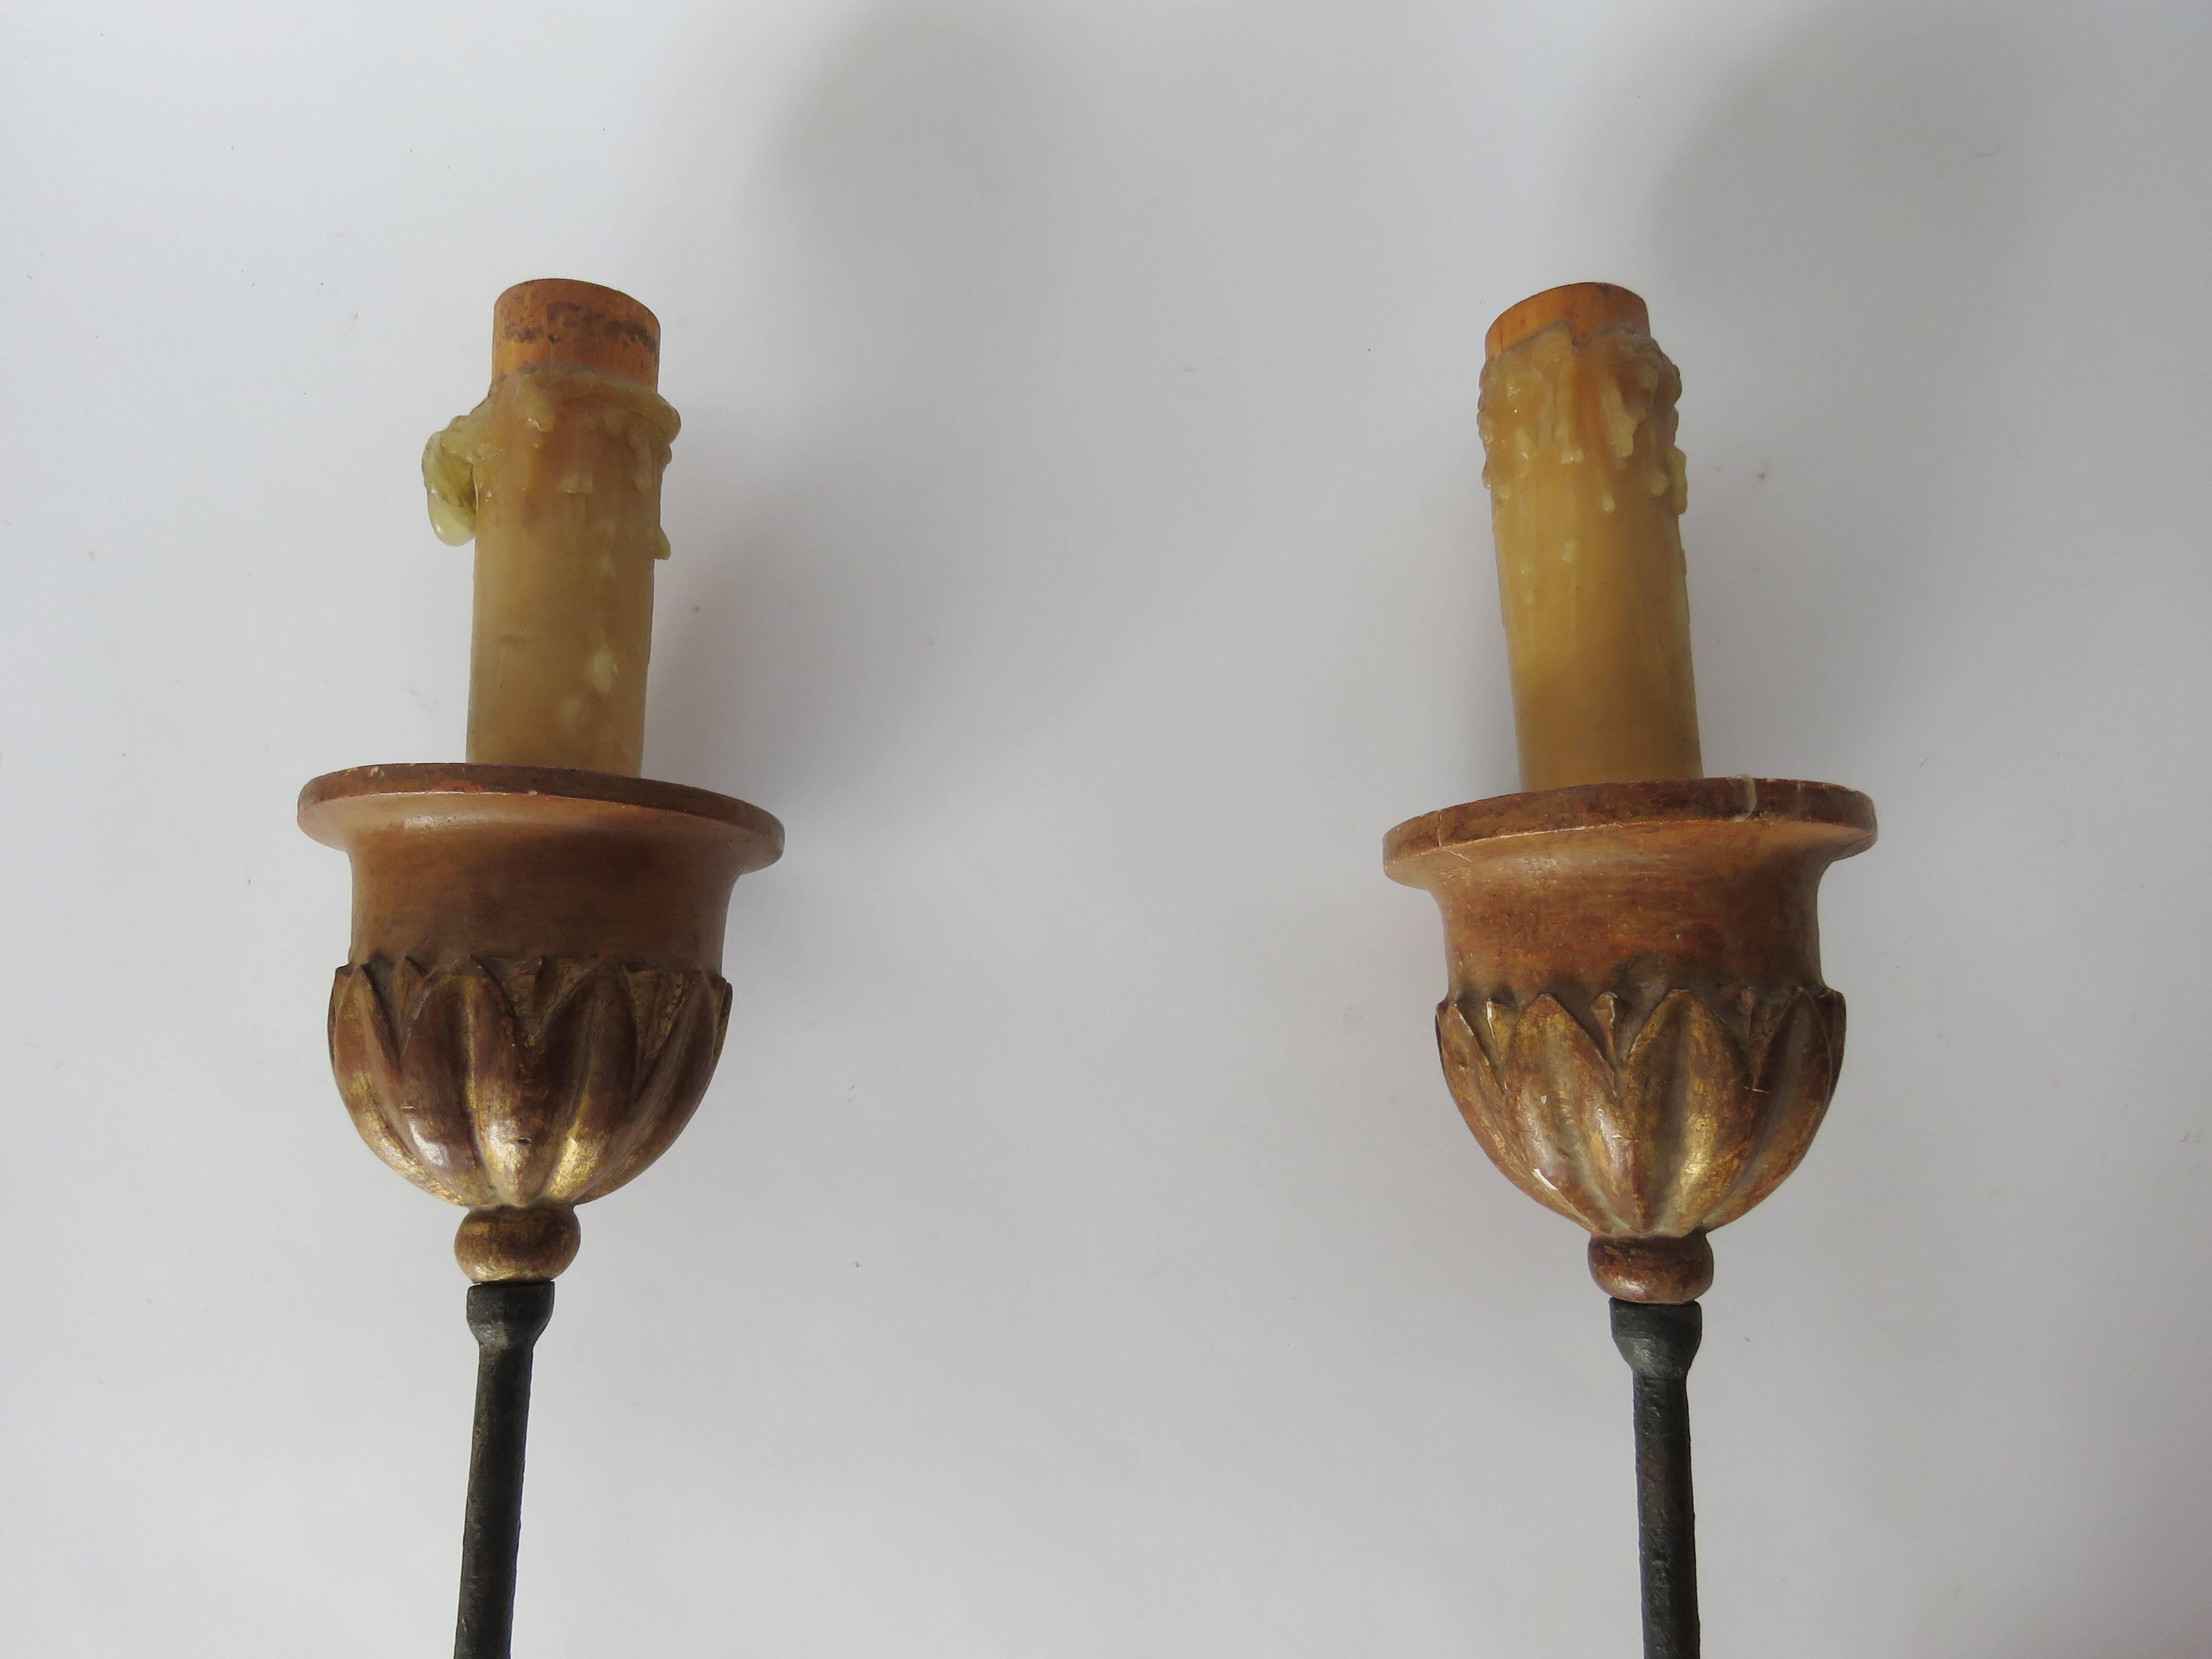 Hand-Crafted Pair of Large Candelabra Applique Sconces For Sale